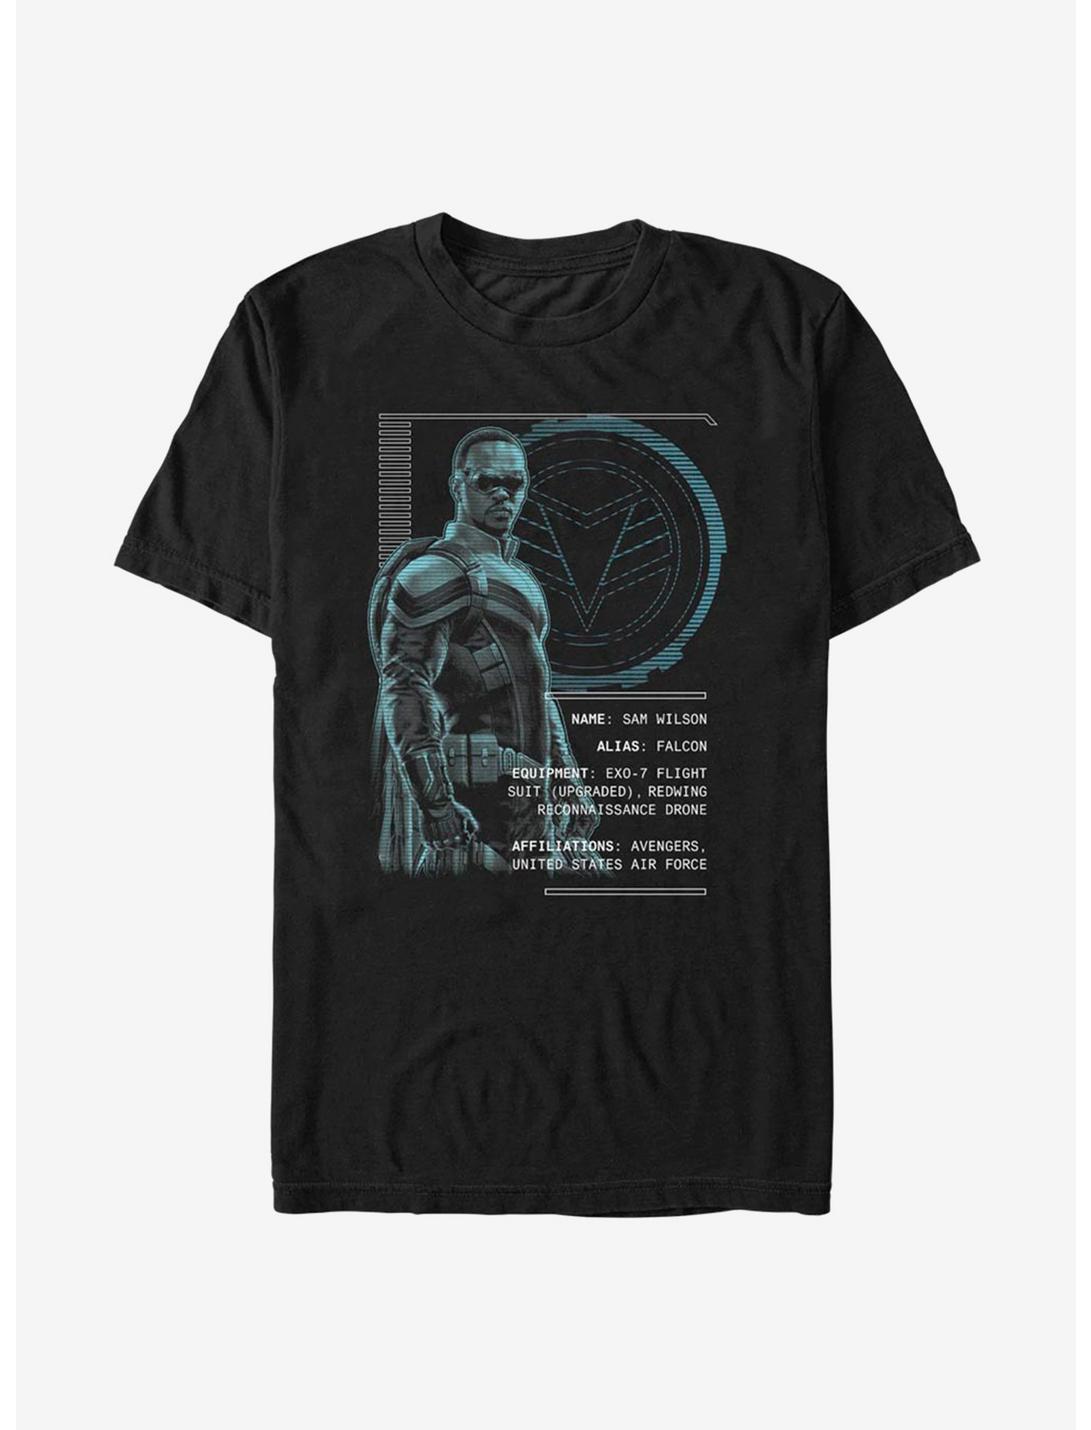 Marvel The Falcon And The Winter Soldier Alias: Falcon T-Shirt, BLACK, hi-res